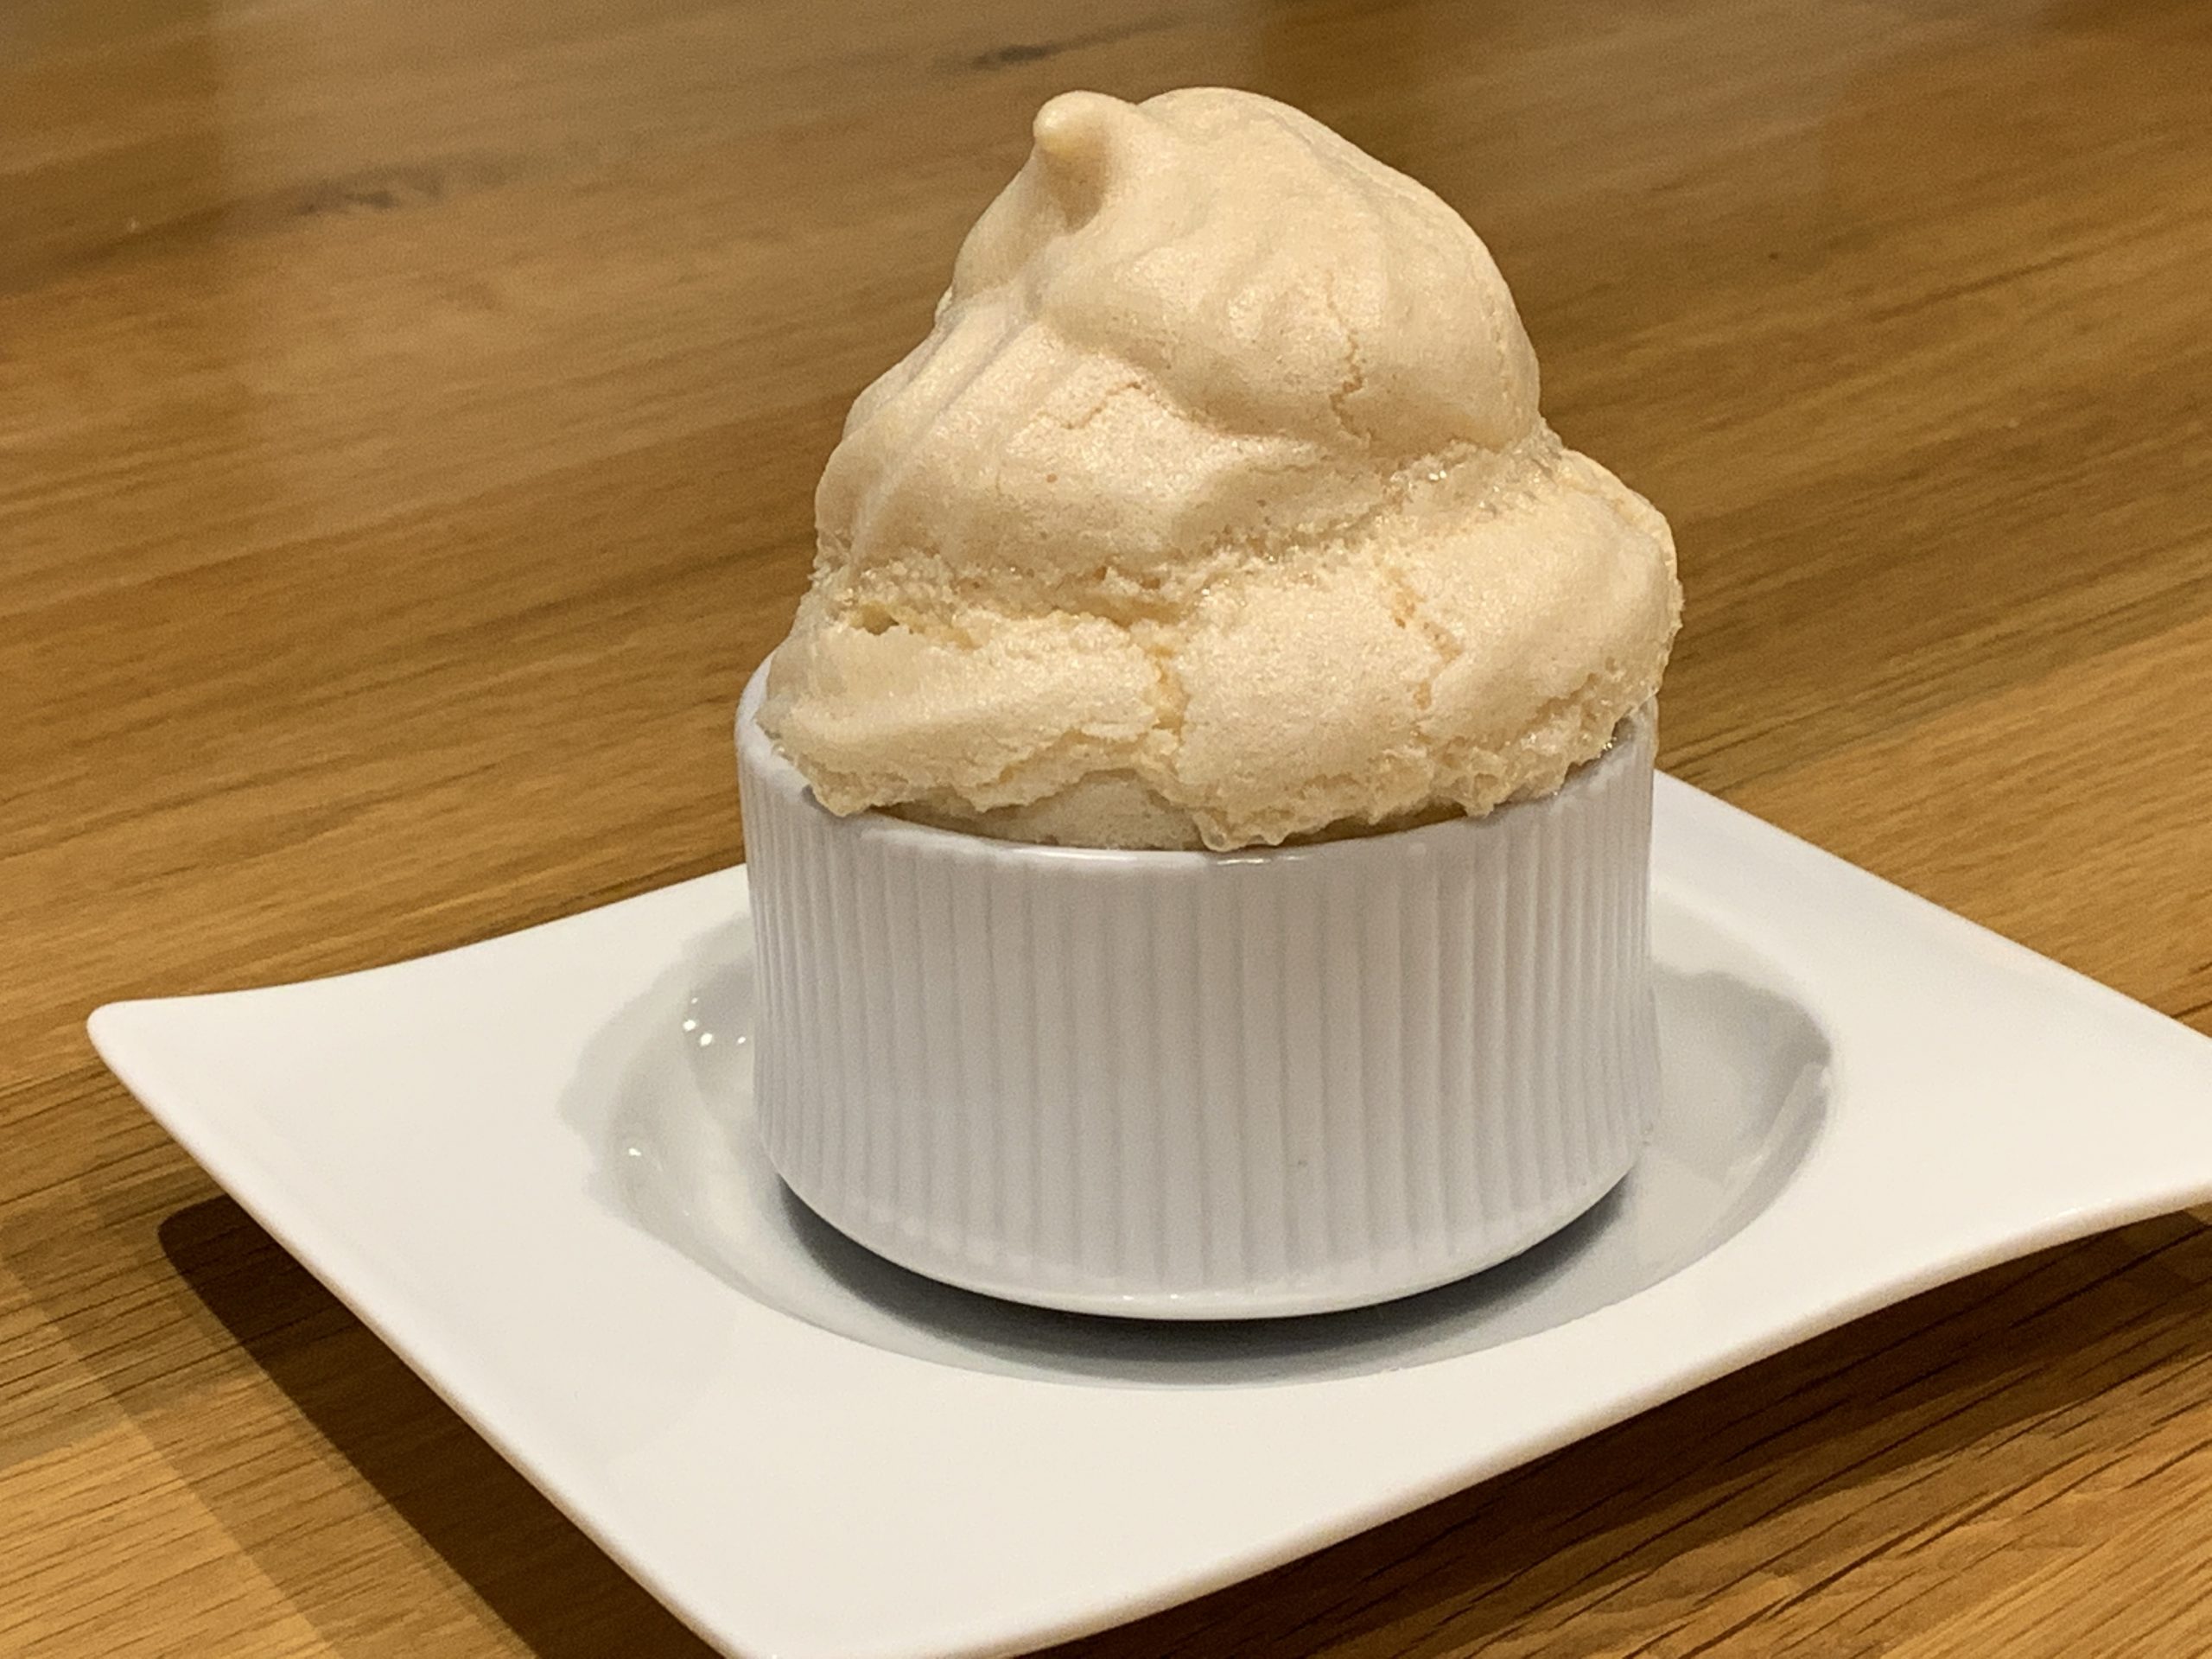 Queen of Puddings - A meringue topped dessert in an individual ramekin dish.